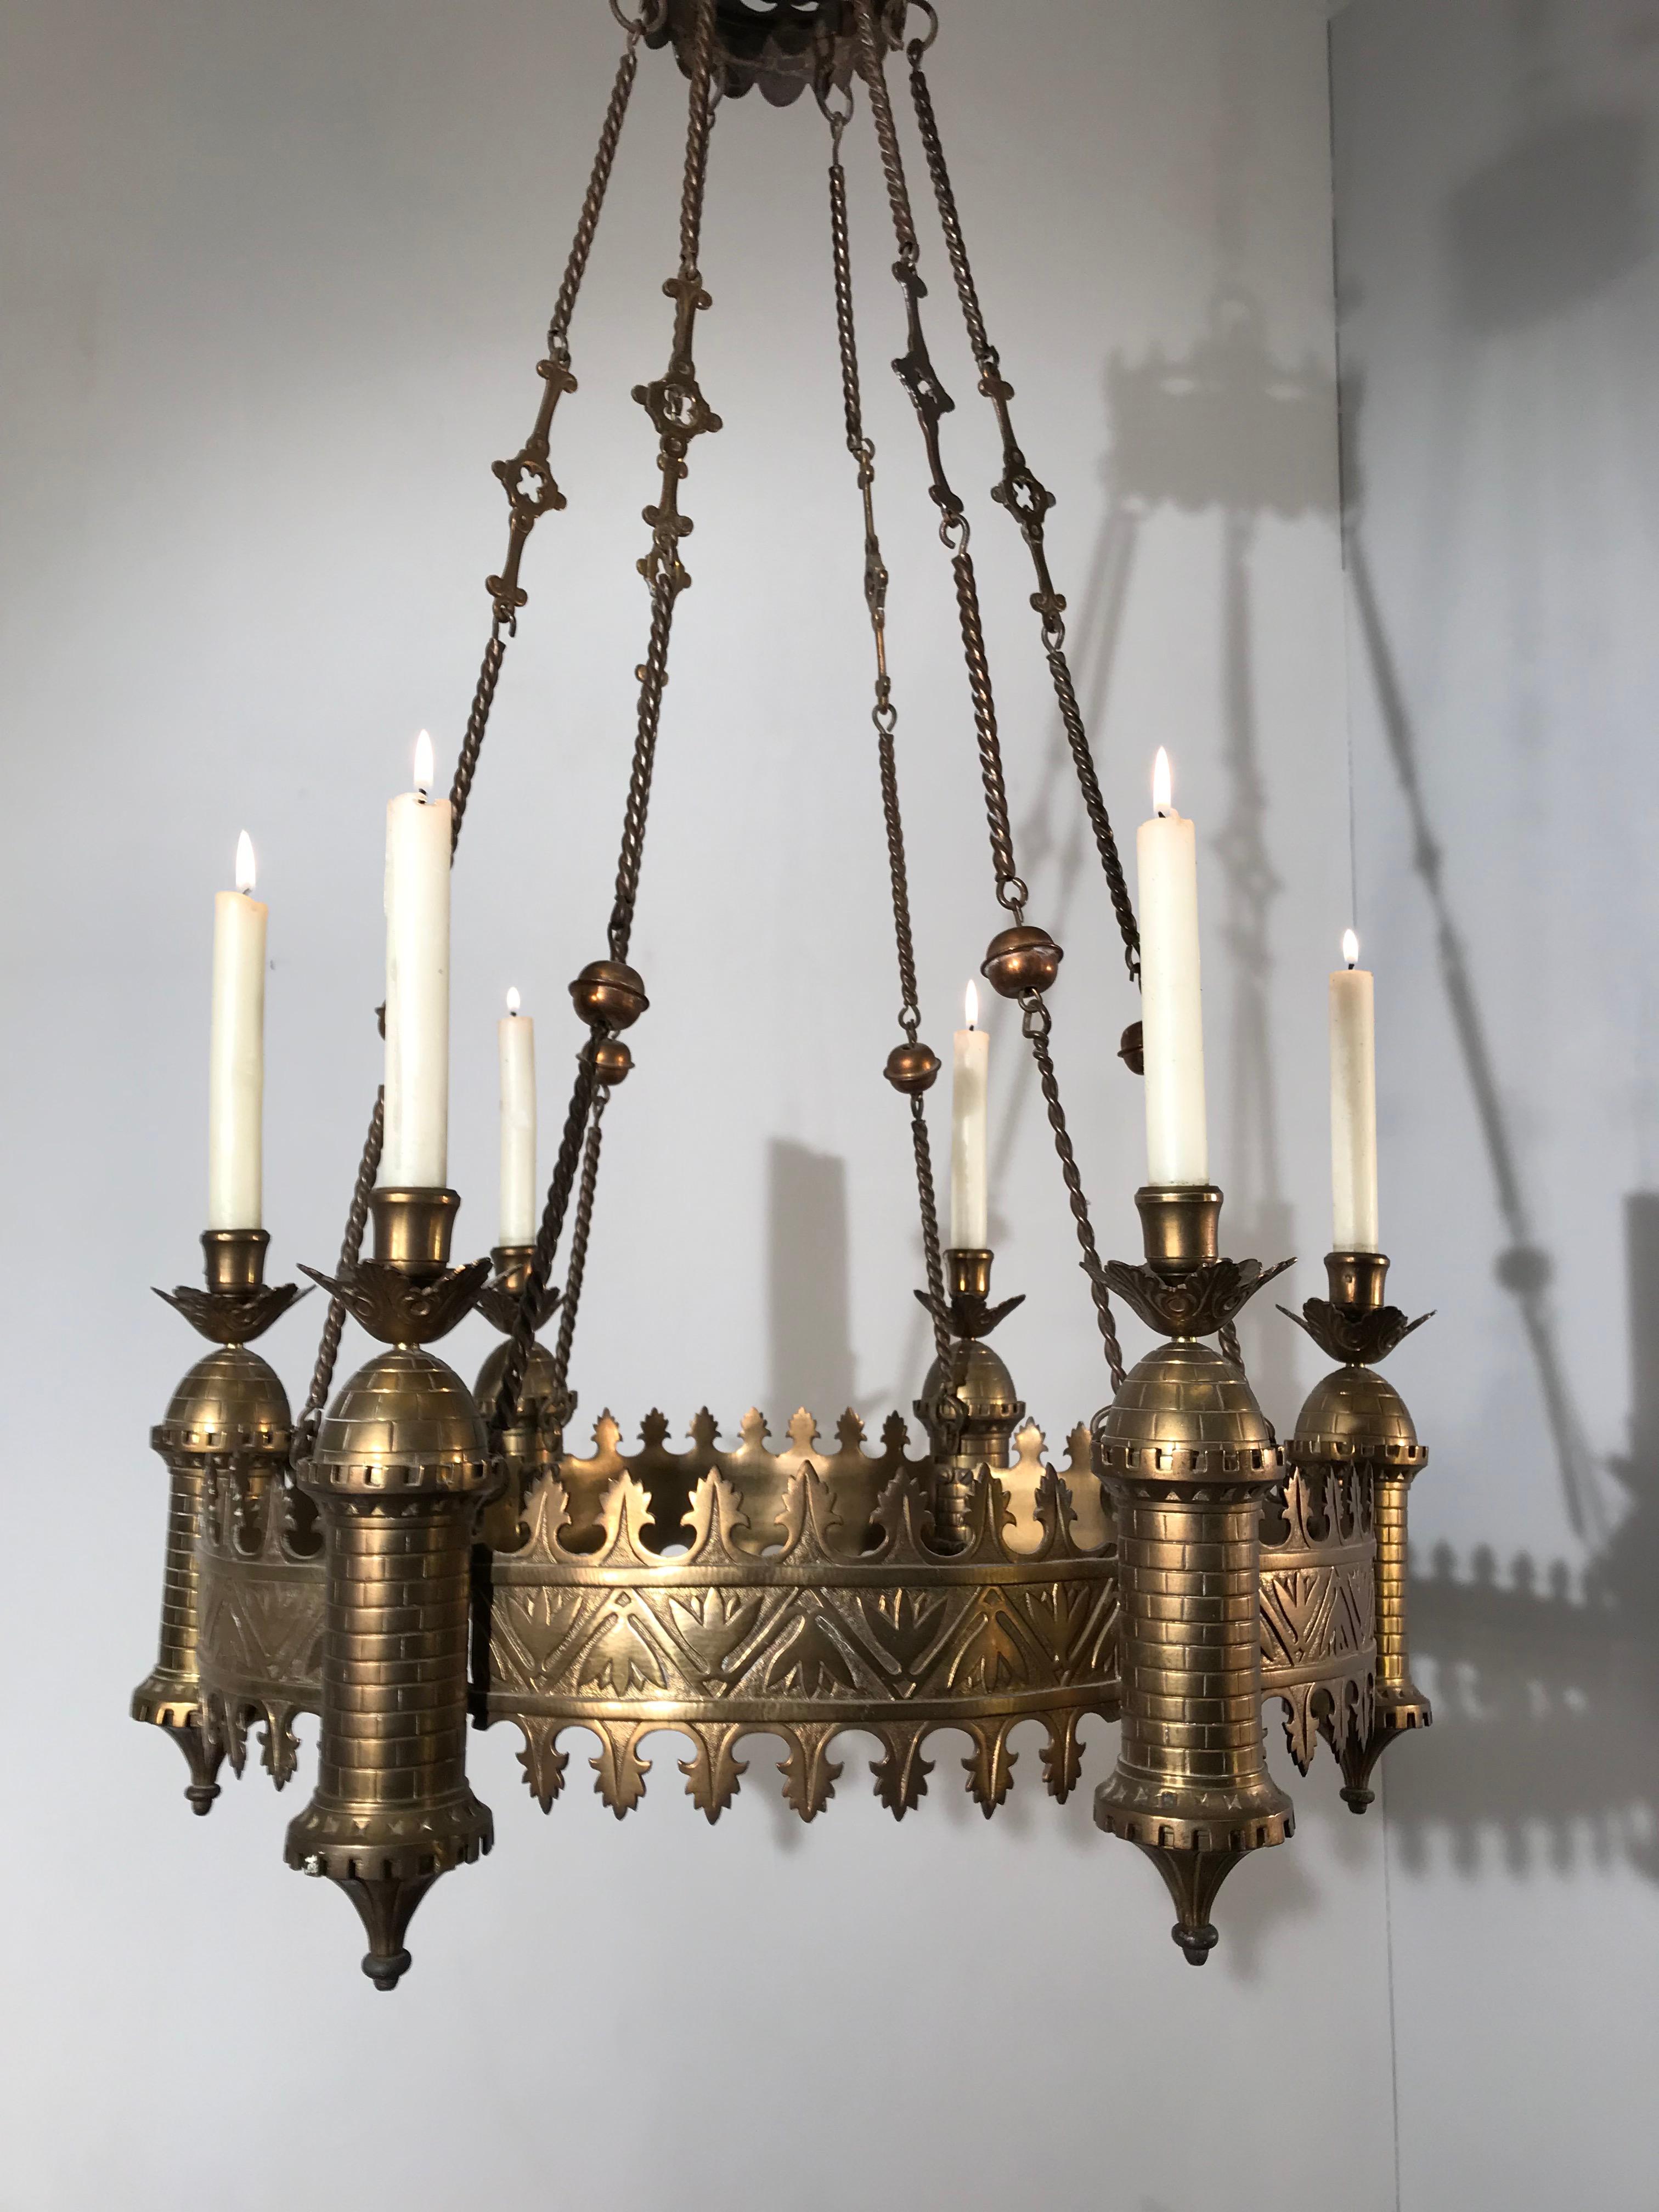 Antique Bronze and Brass Castle Tower Design Gothic Revival Candle Chandelier 4